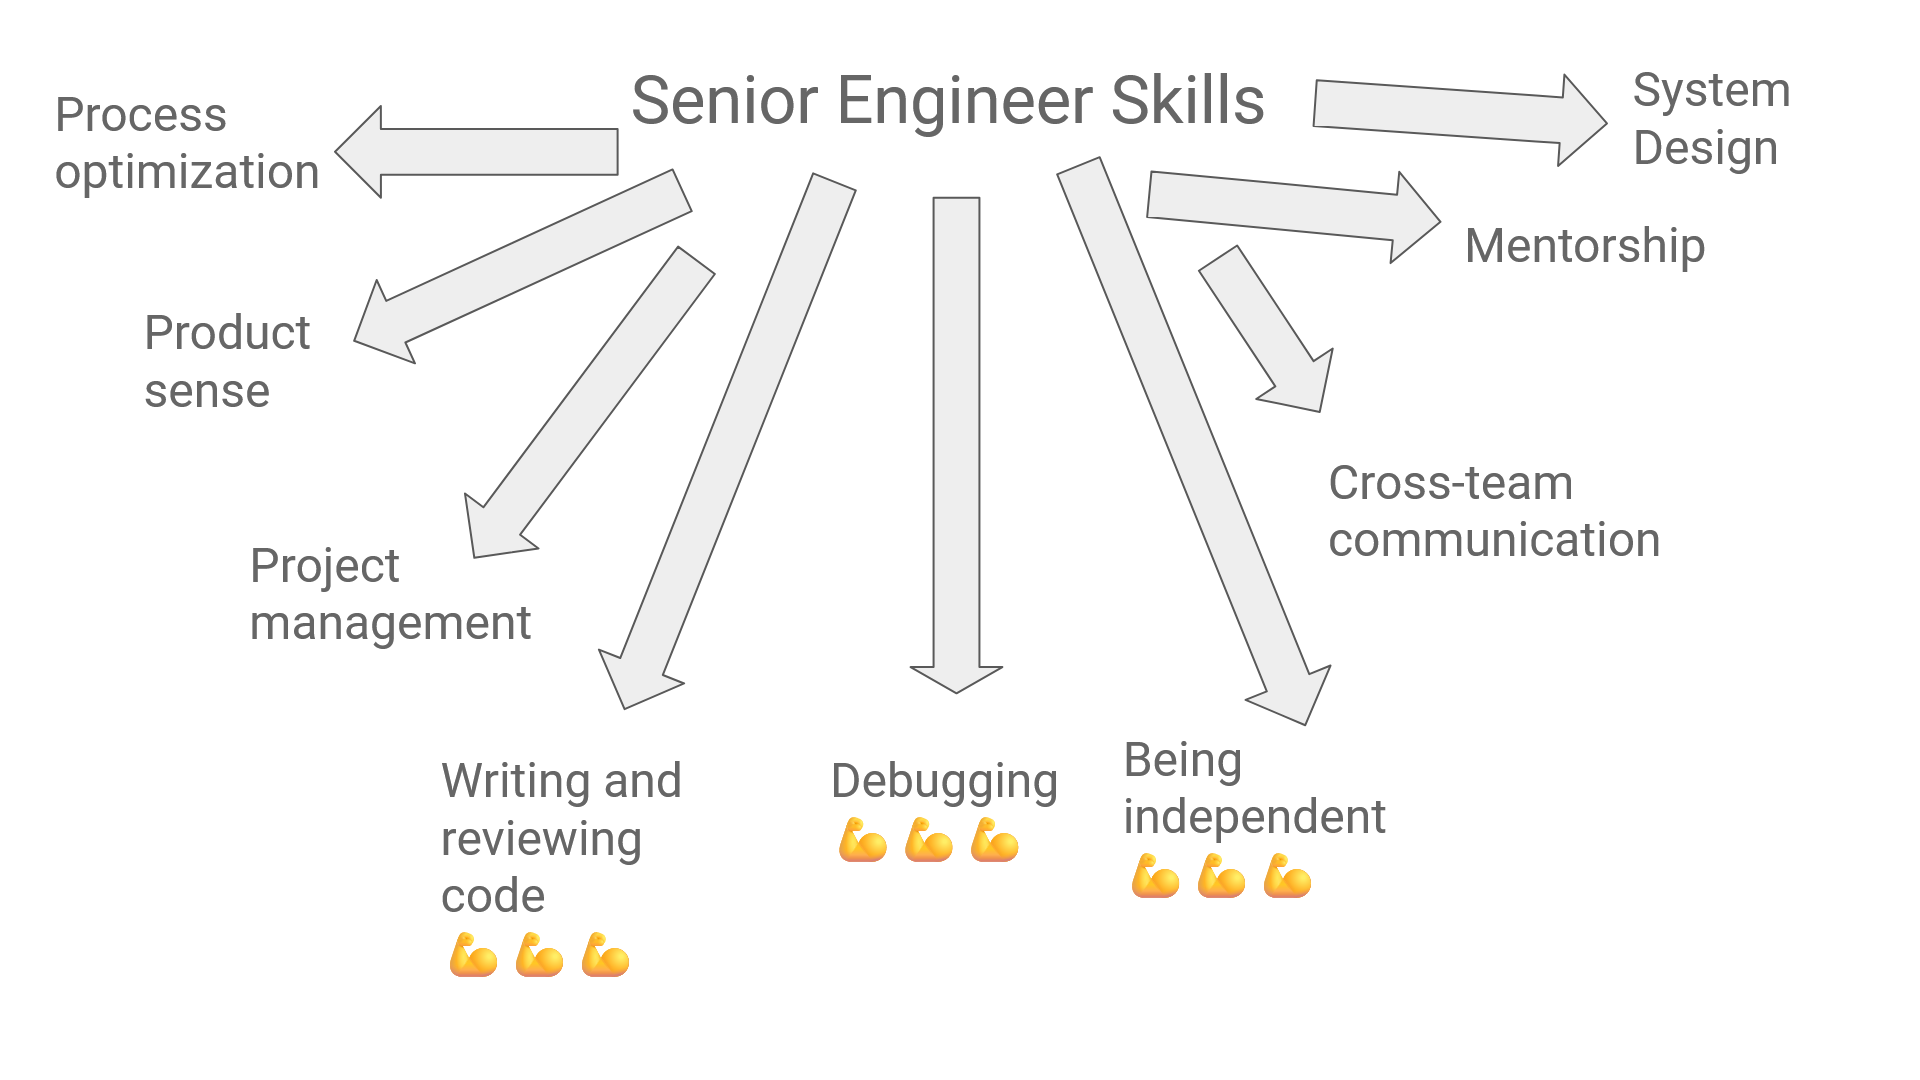 Grow From Mid-Level To Senior Engineer [Part 2] - Why Is The Senior Promotion So Hard?